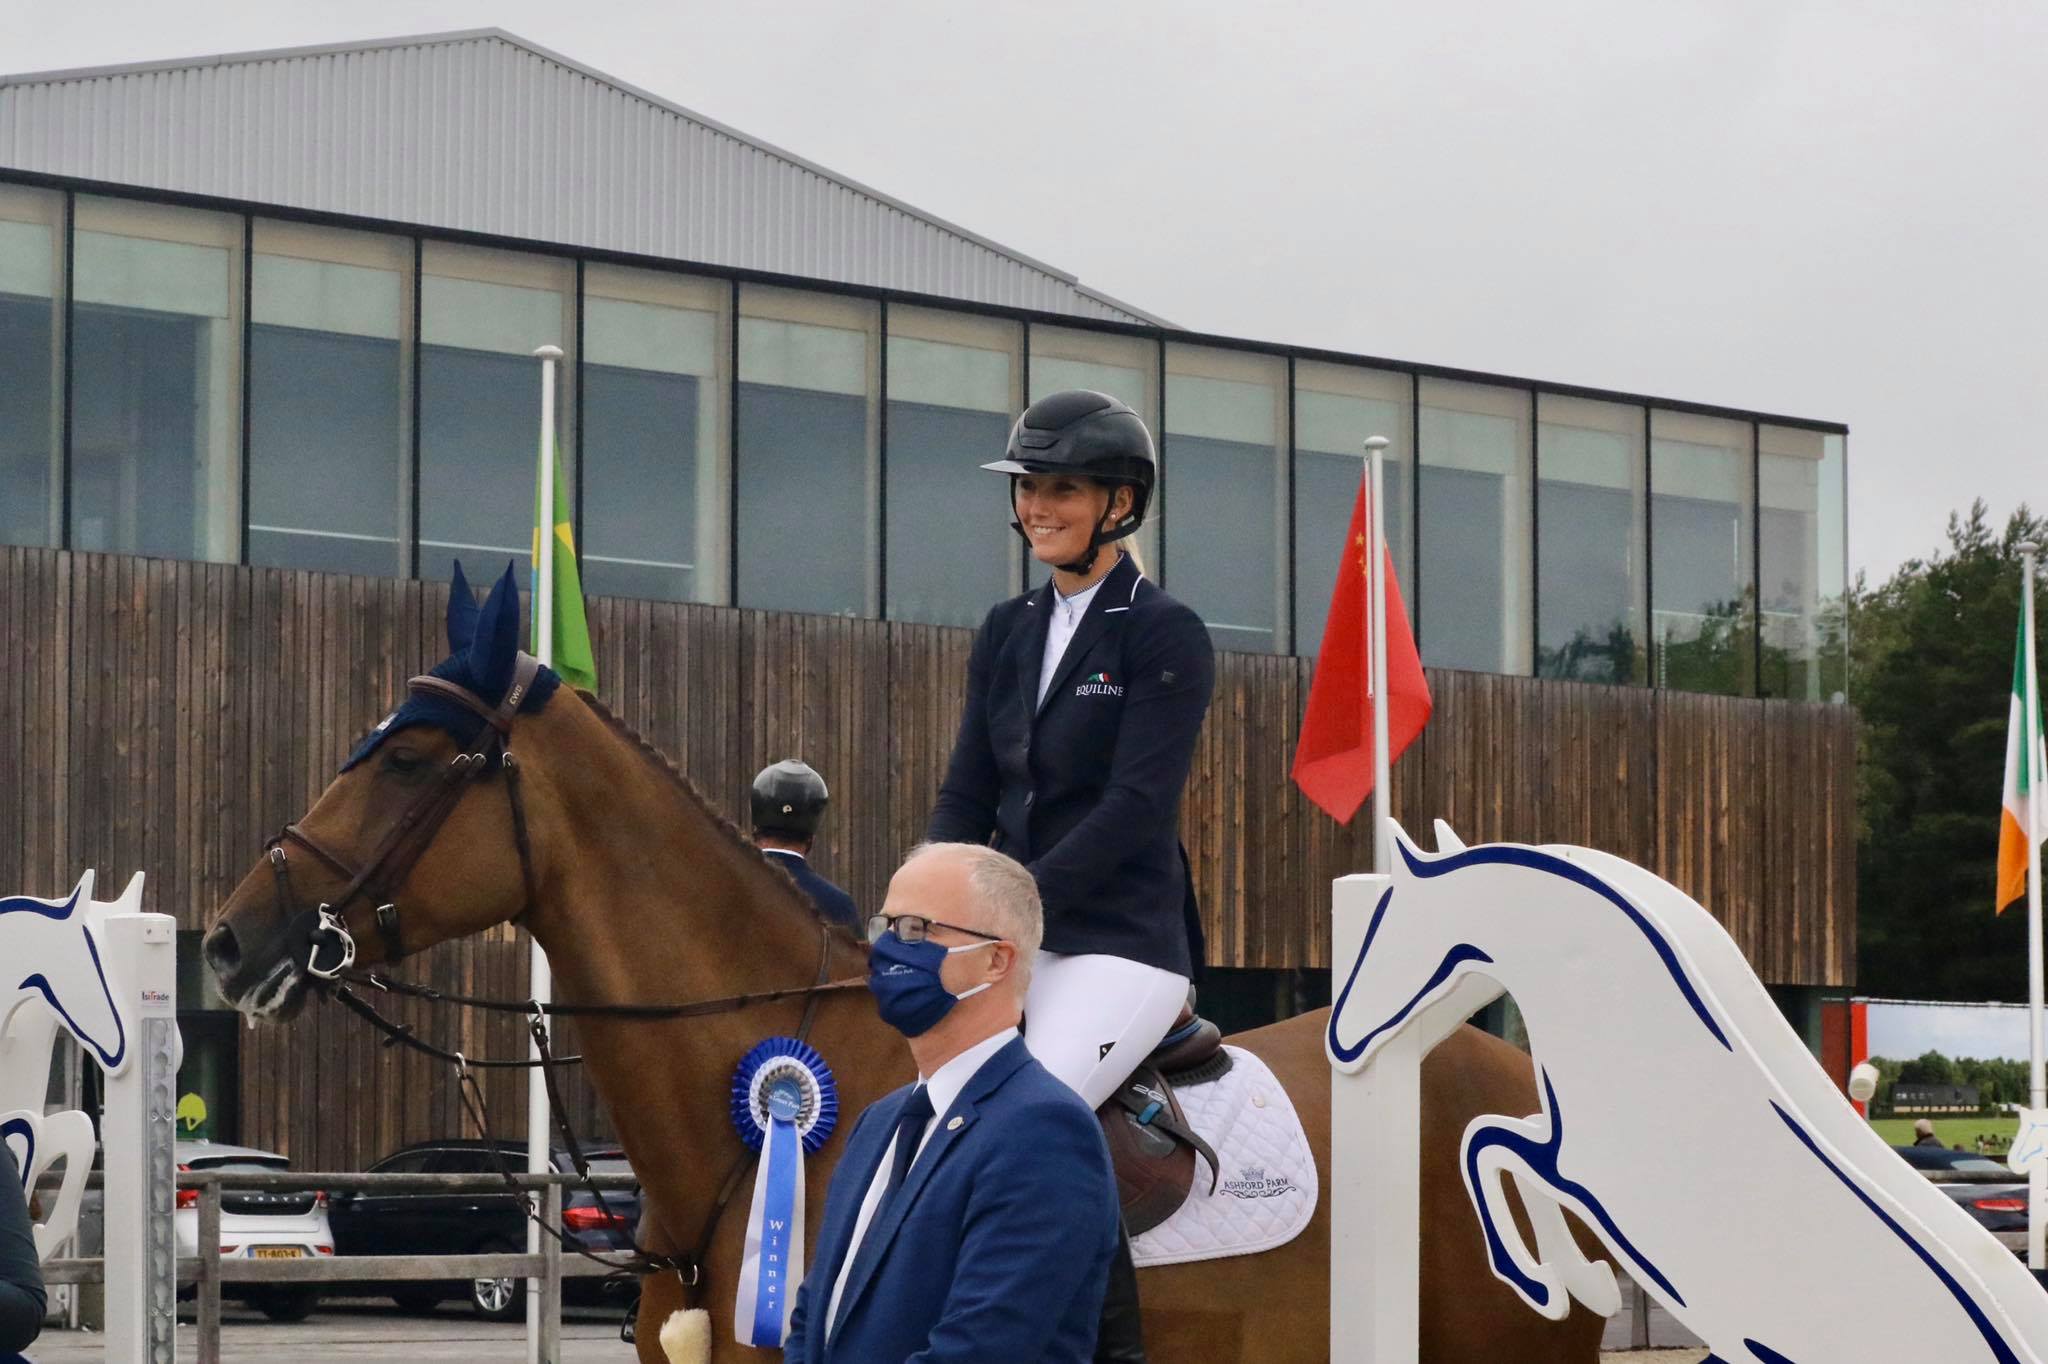 Horses and riders for CSI4* Sentower Park